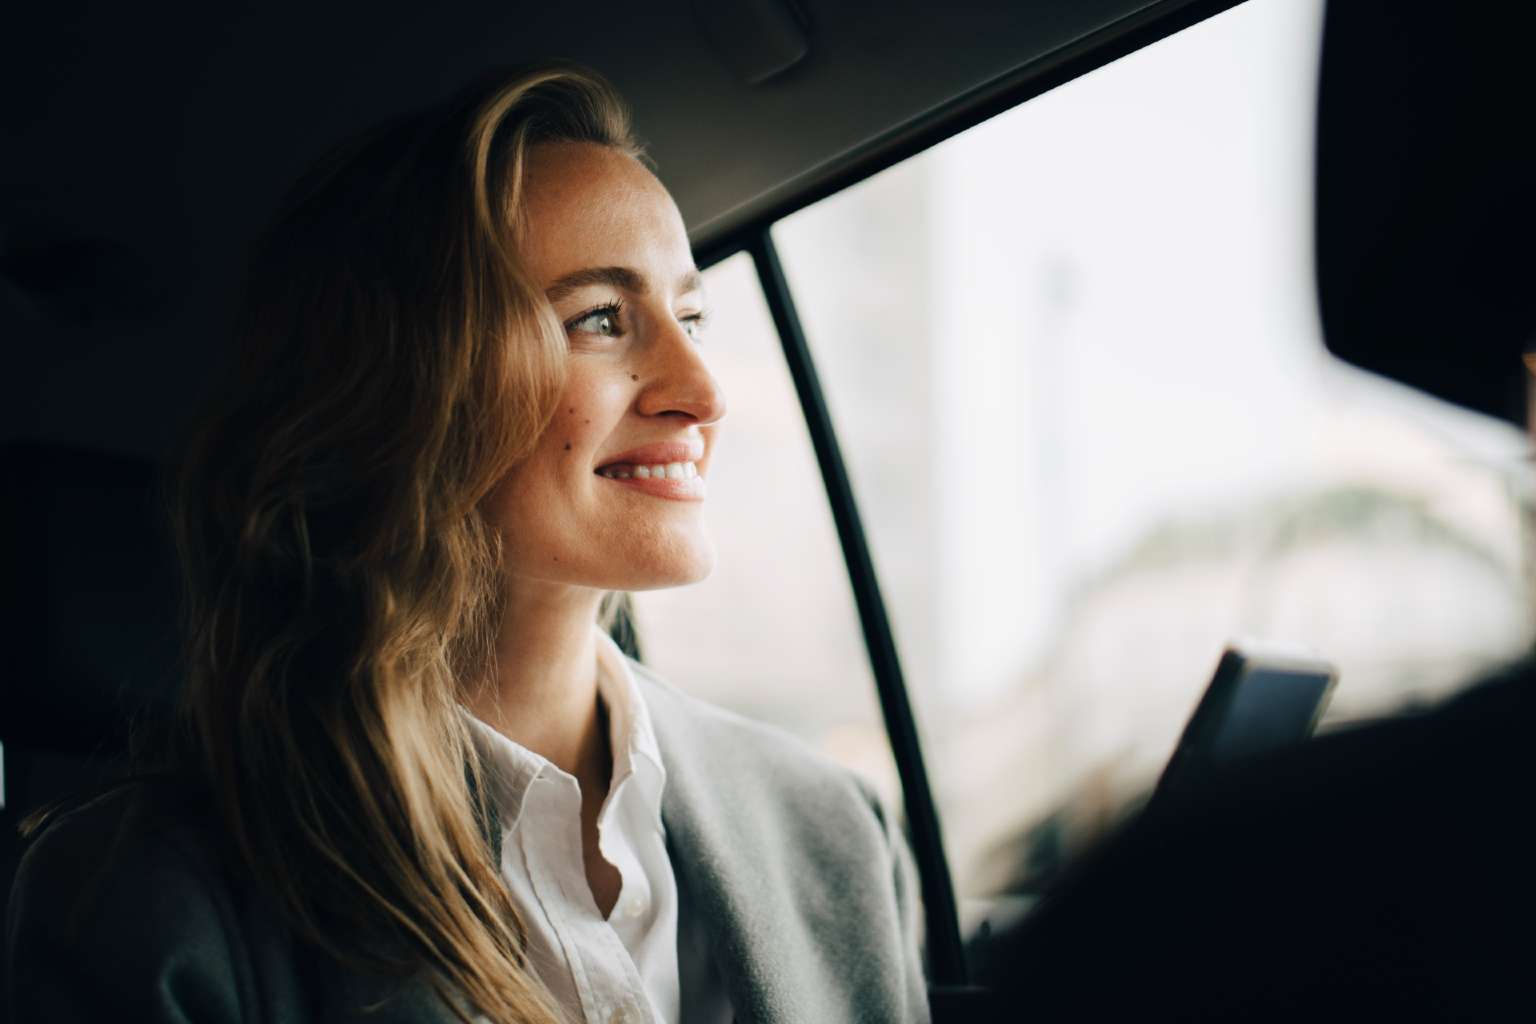 Business woman in car checking phone